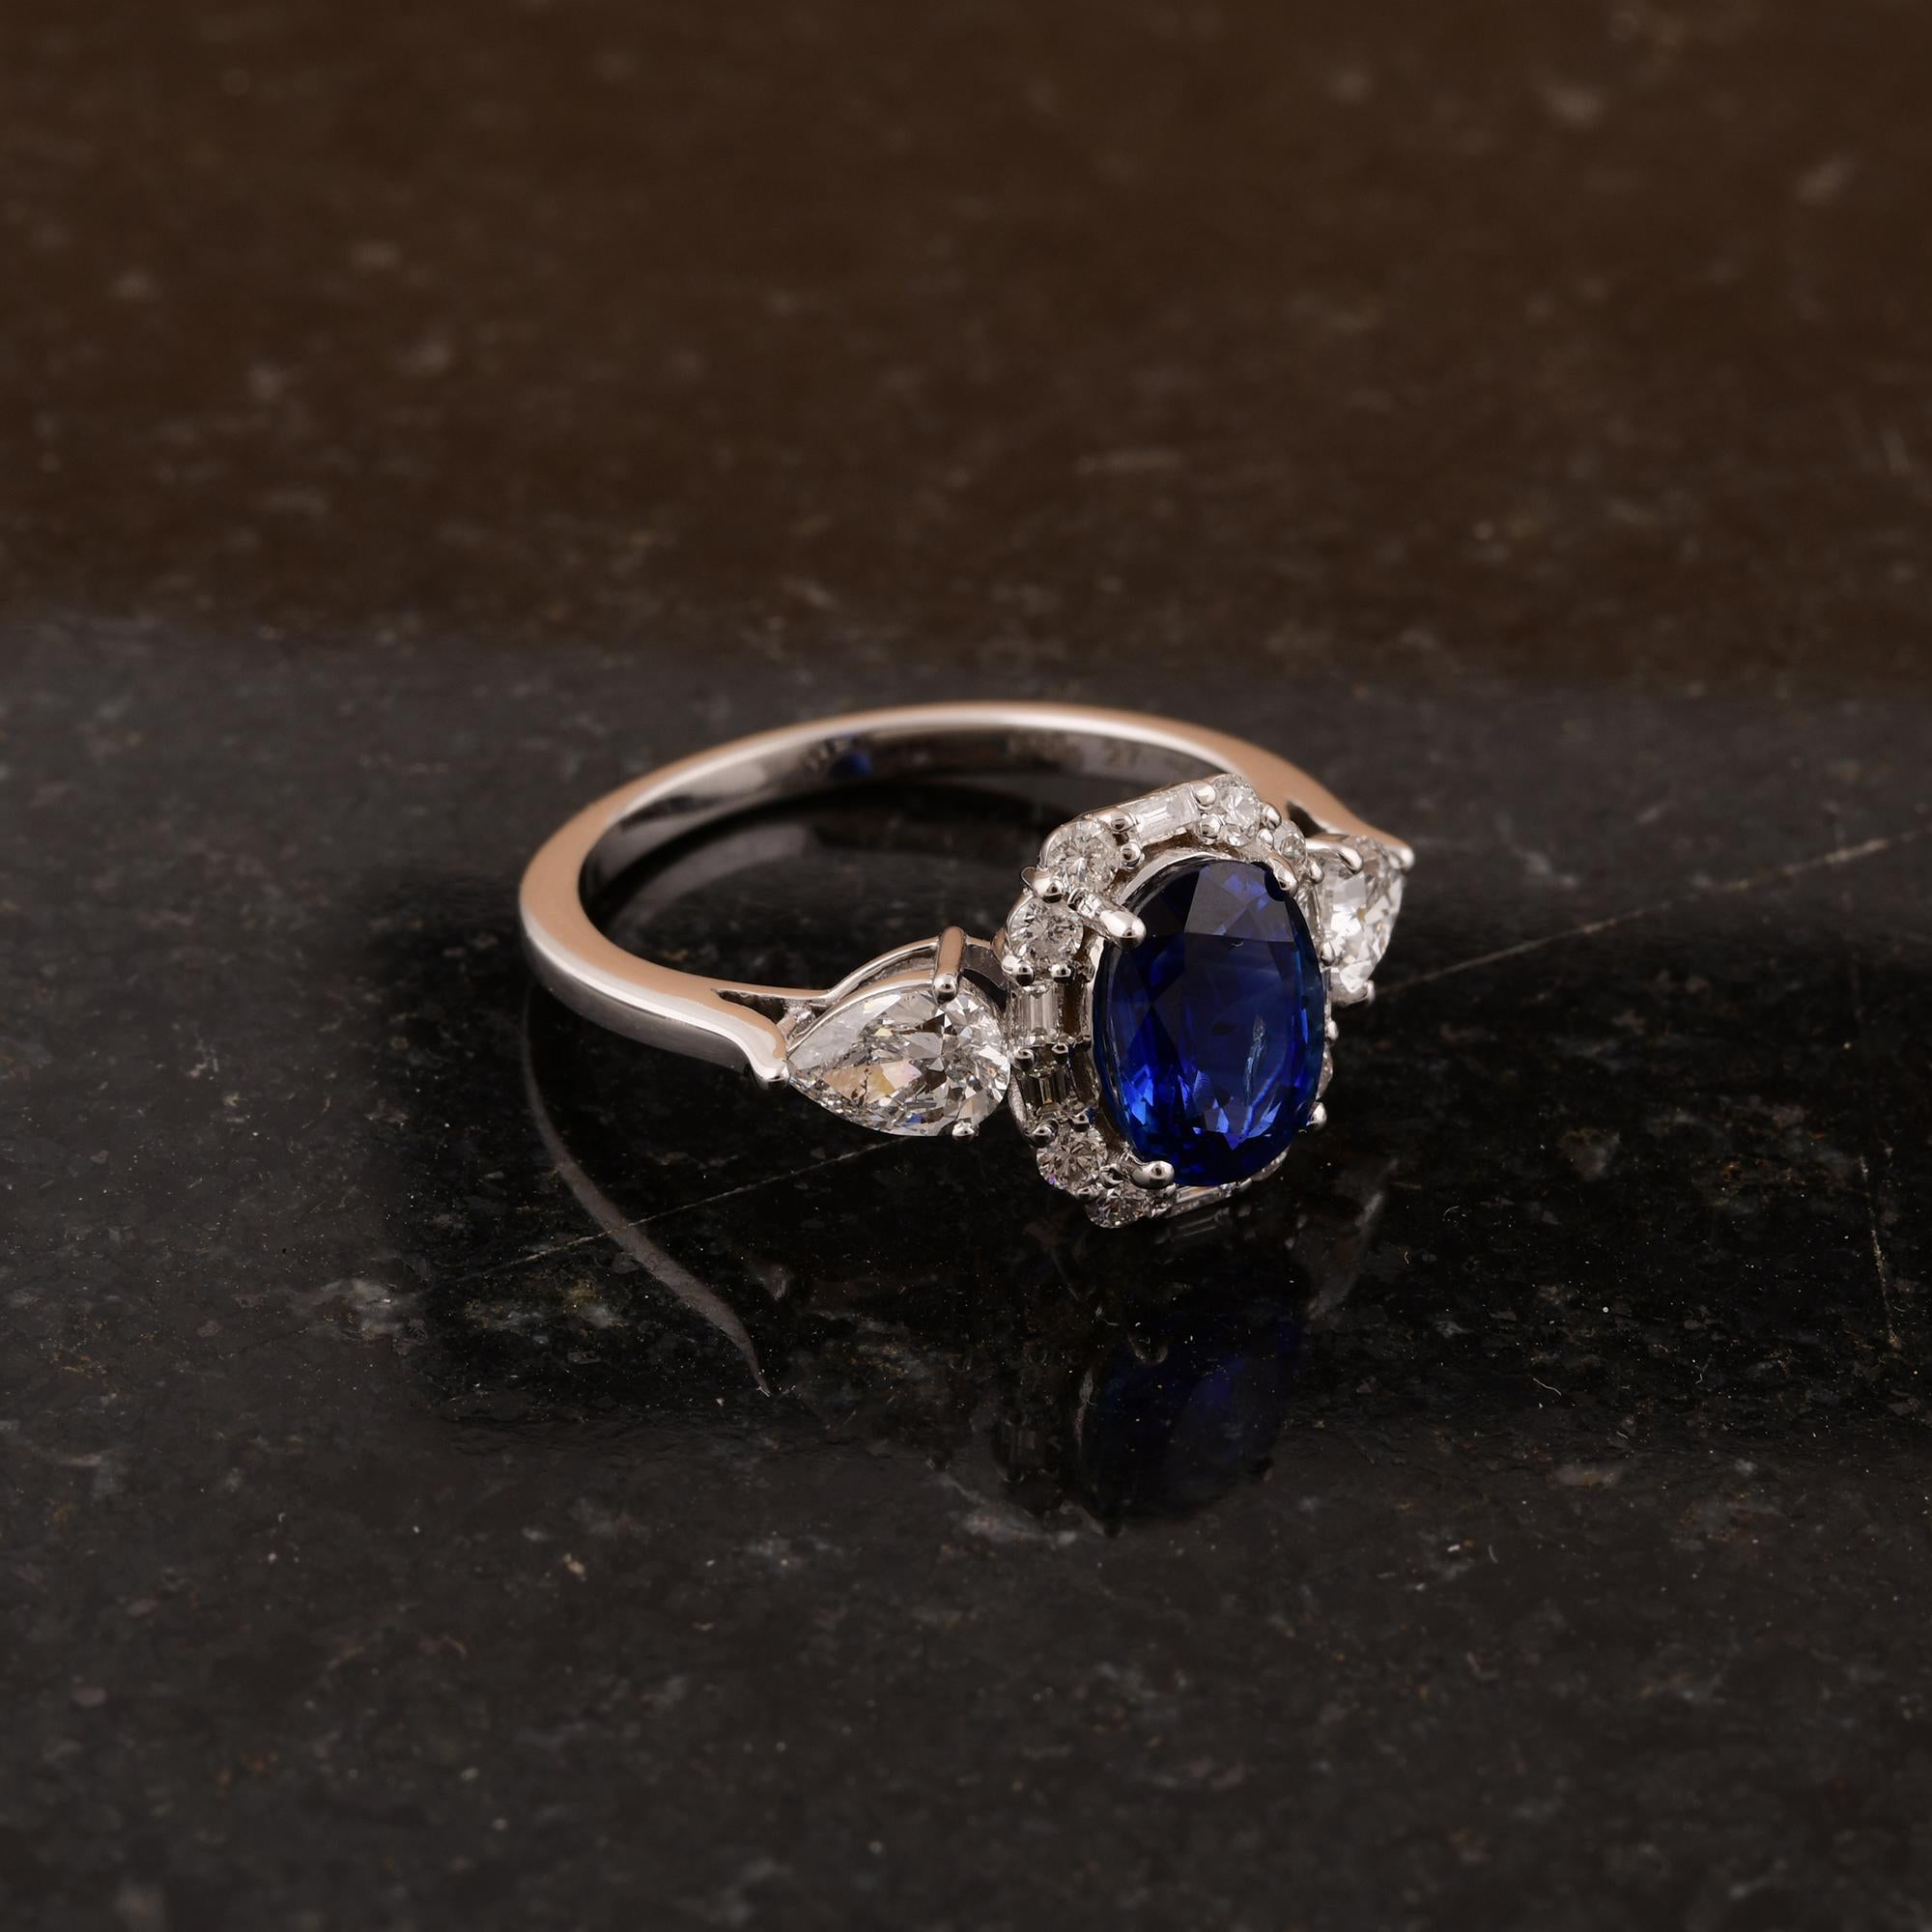 Women's Real Blue Sapphire Cocktail Ring SI Clarity HI Color Diamond 18 Karat White Gold For Sale